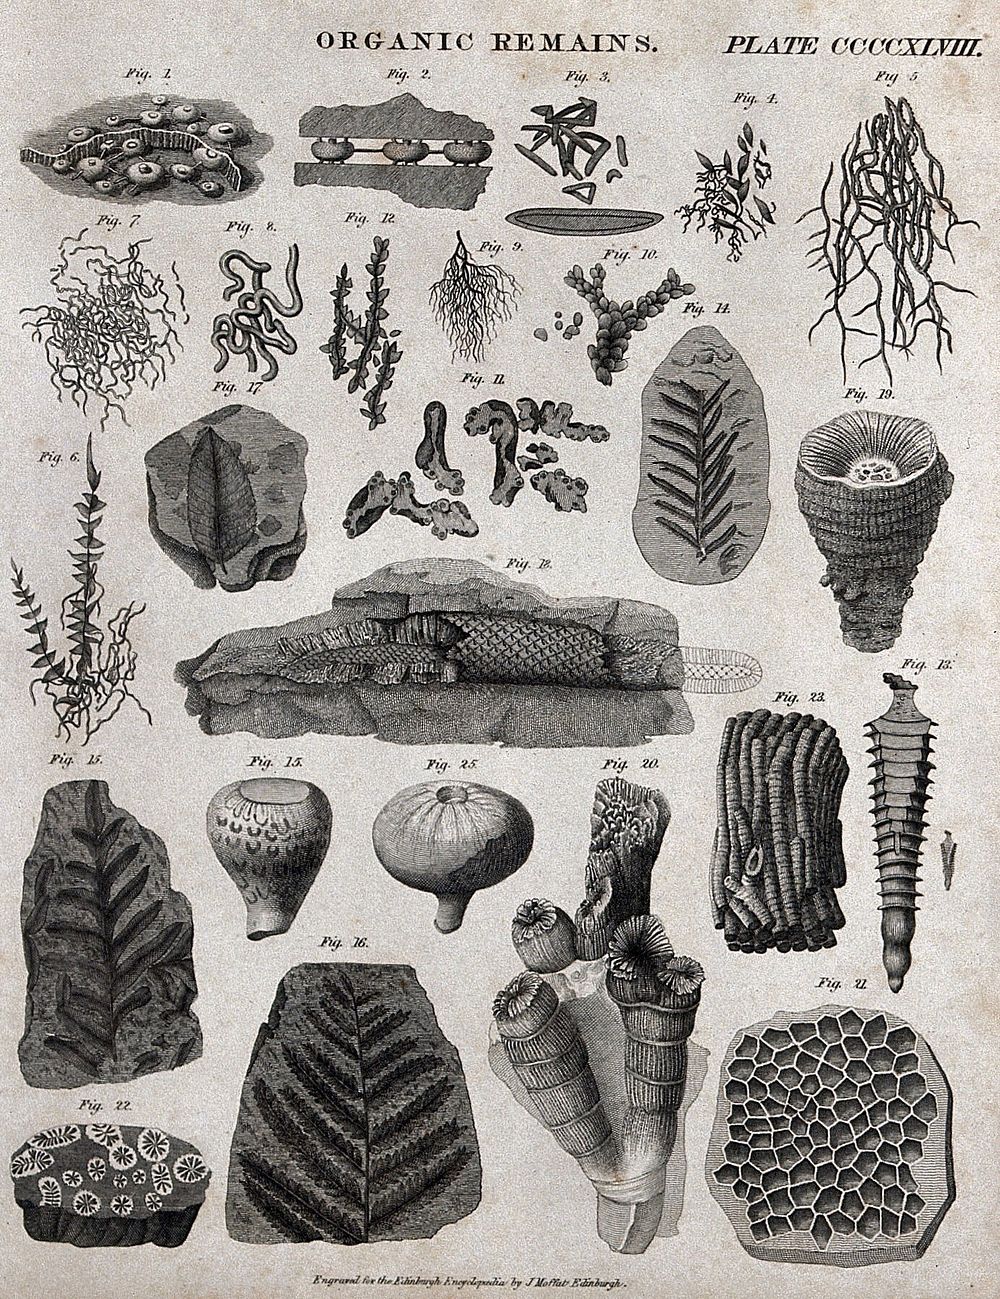 Organic remains, some fossilised, of plants and animals. Engraving by J. Moffat.